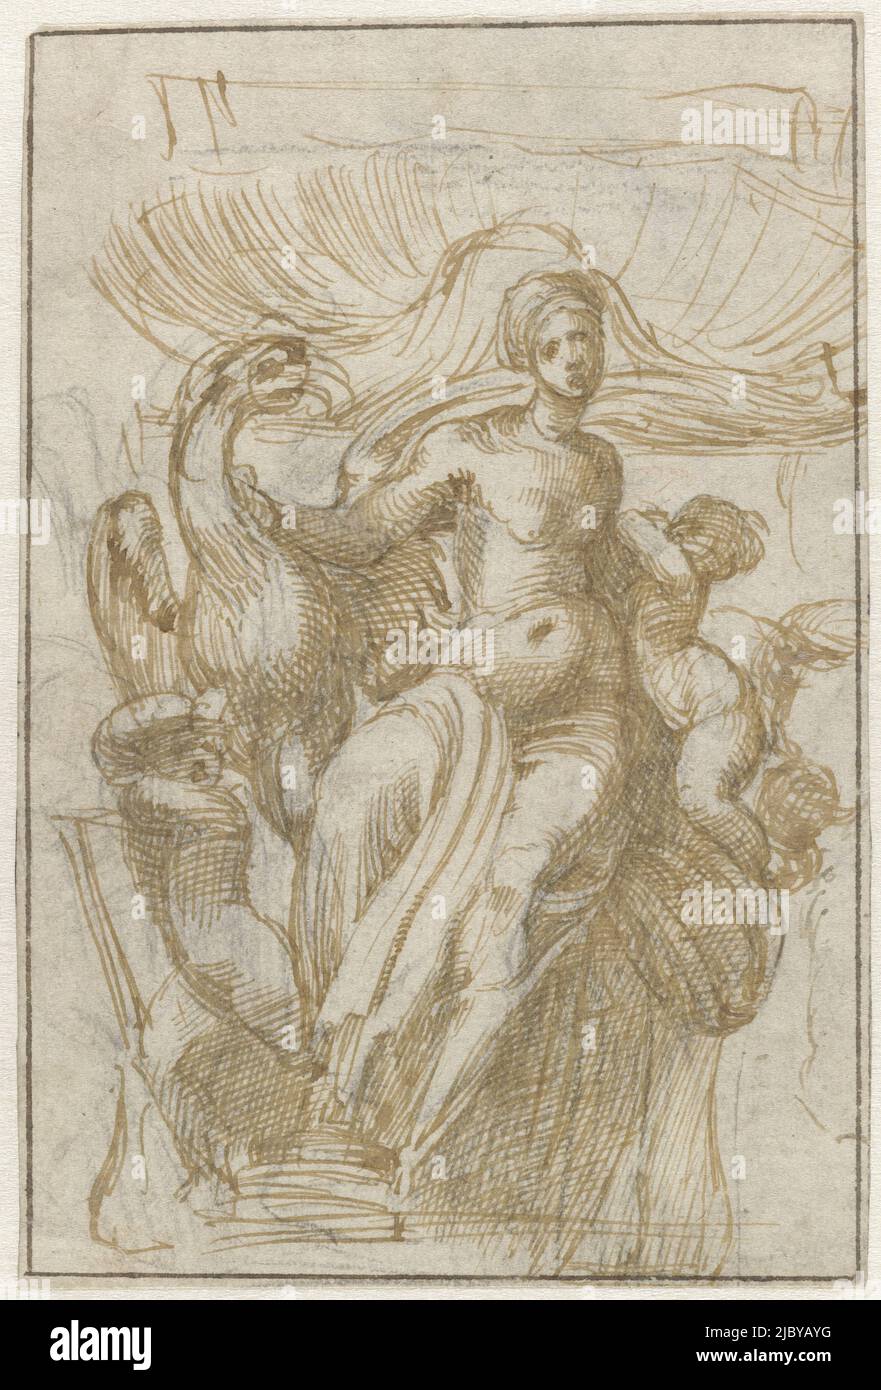 Leda or Venus (?) with bird and putti in front of a shell, Alonso Berruguete, 1500 - 1561, Design for a fountain., draughtsman: Alonso Berruguete, 1500 - 1561, paper, pen, h 182 mm × w 122 mm Stock Photo